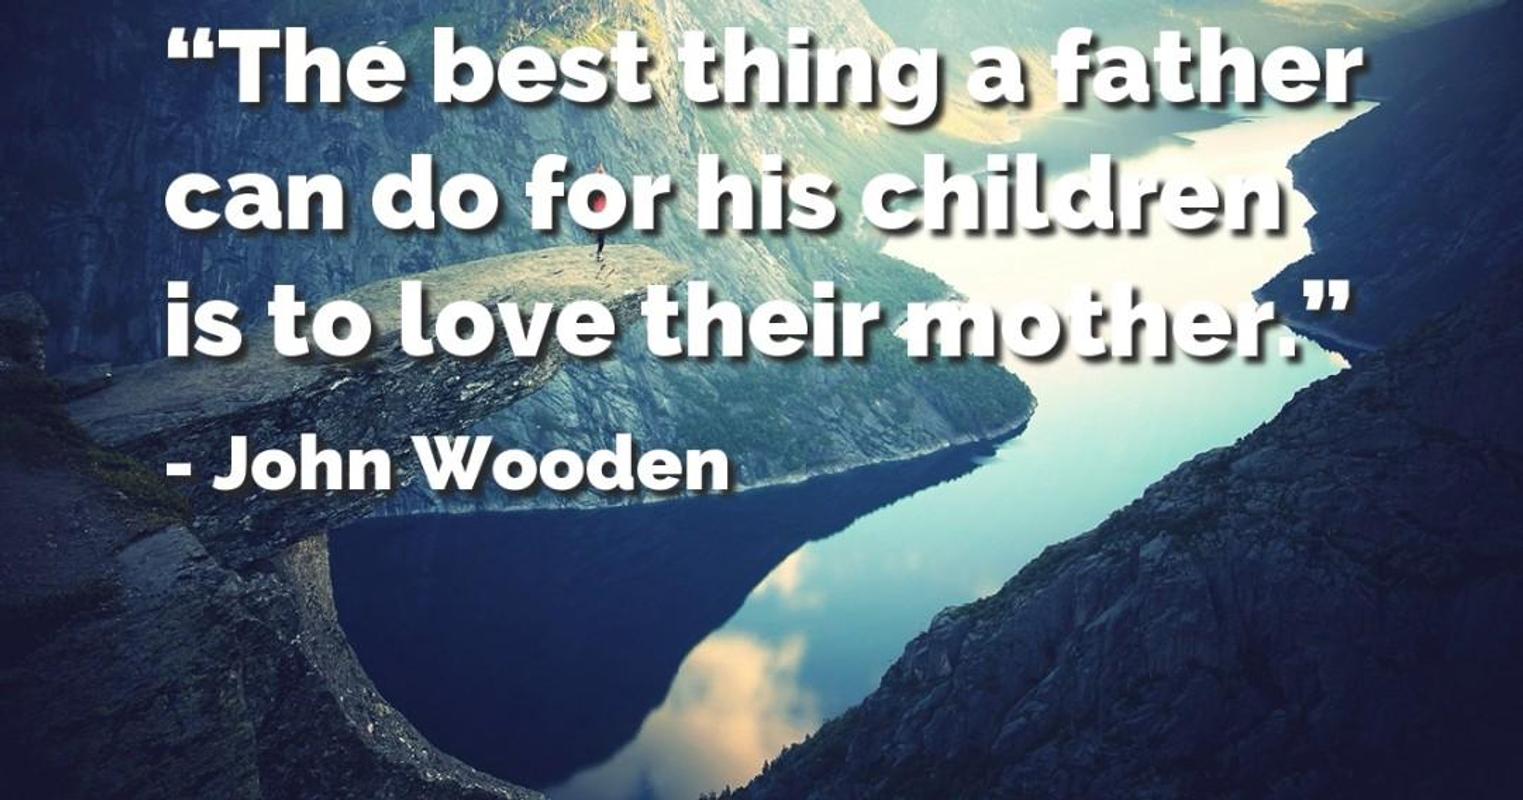 John Wooden Quotes for Android - APK Download